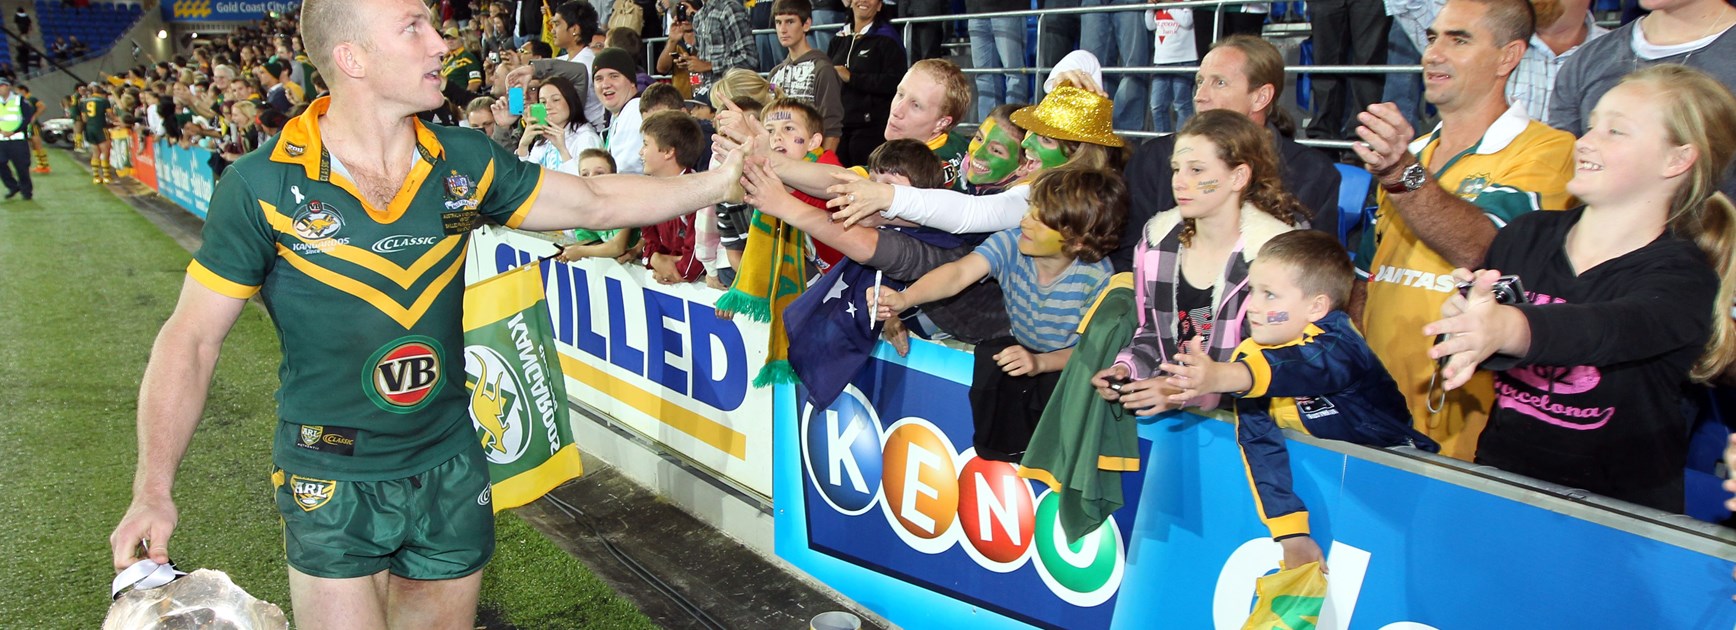 Lockyer carries the Bill Kelly Cup on a victory lap after guiding Australia to a win over the Kiwis.